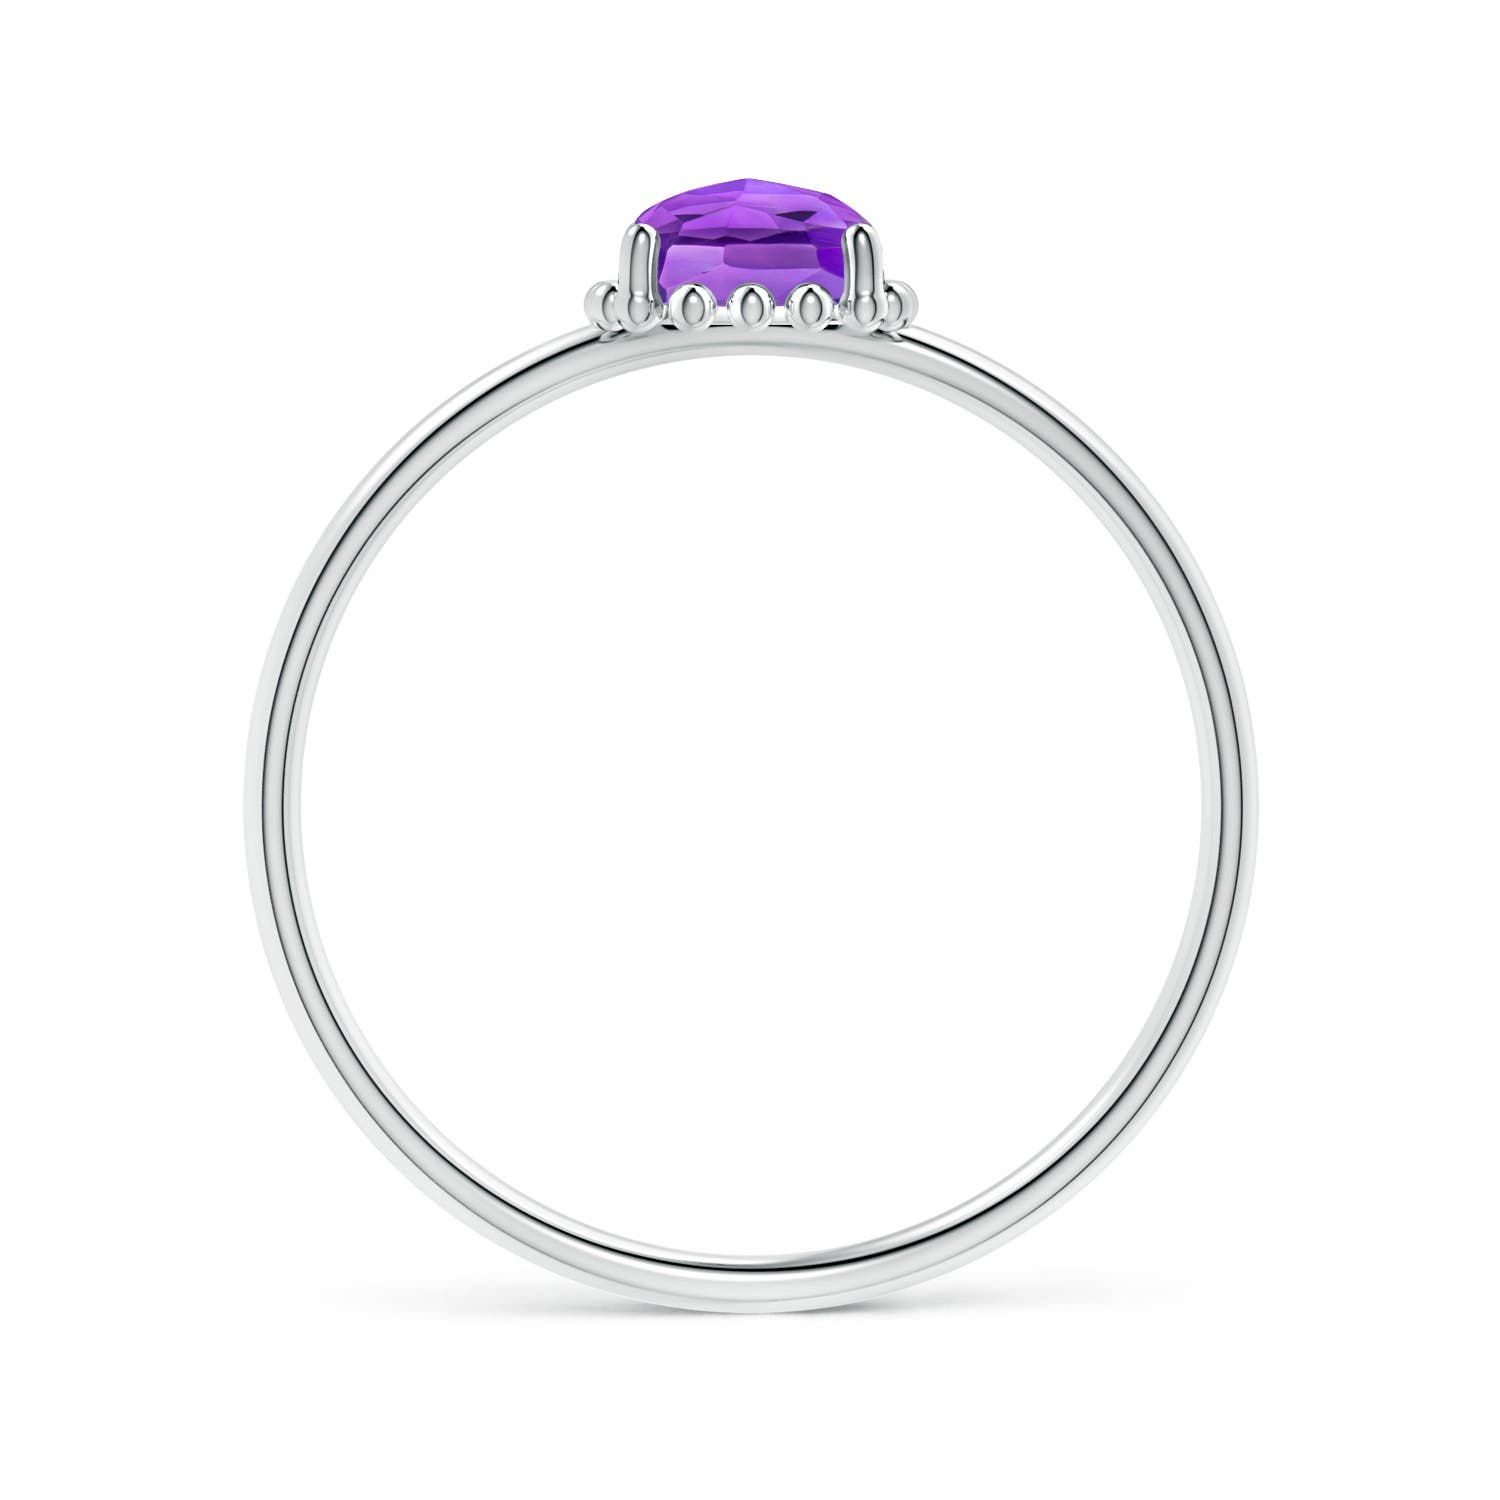 AAA - Amethyst / 0.5 CT / 14 KT White Gold